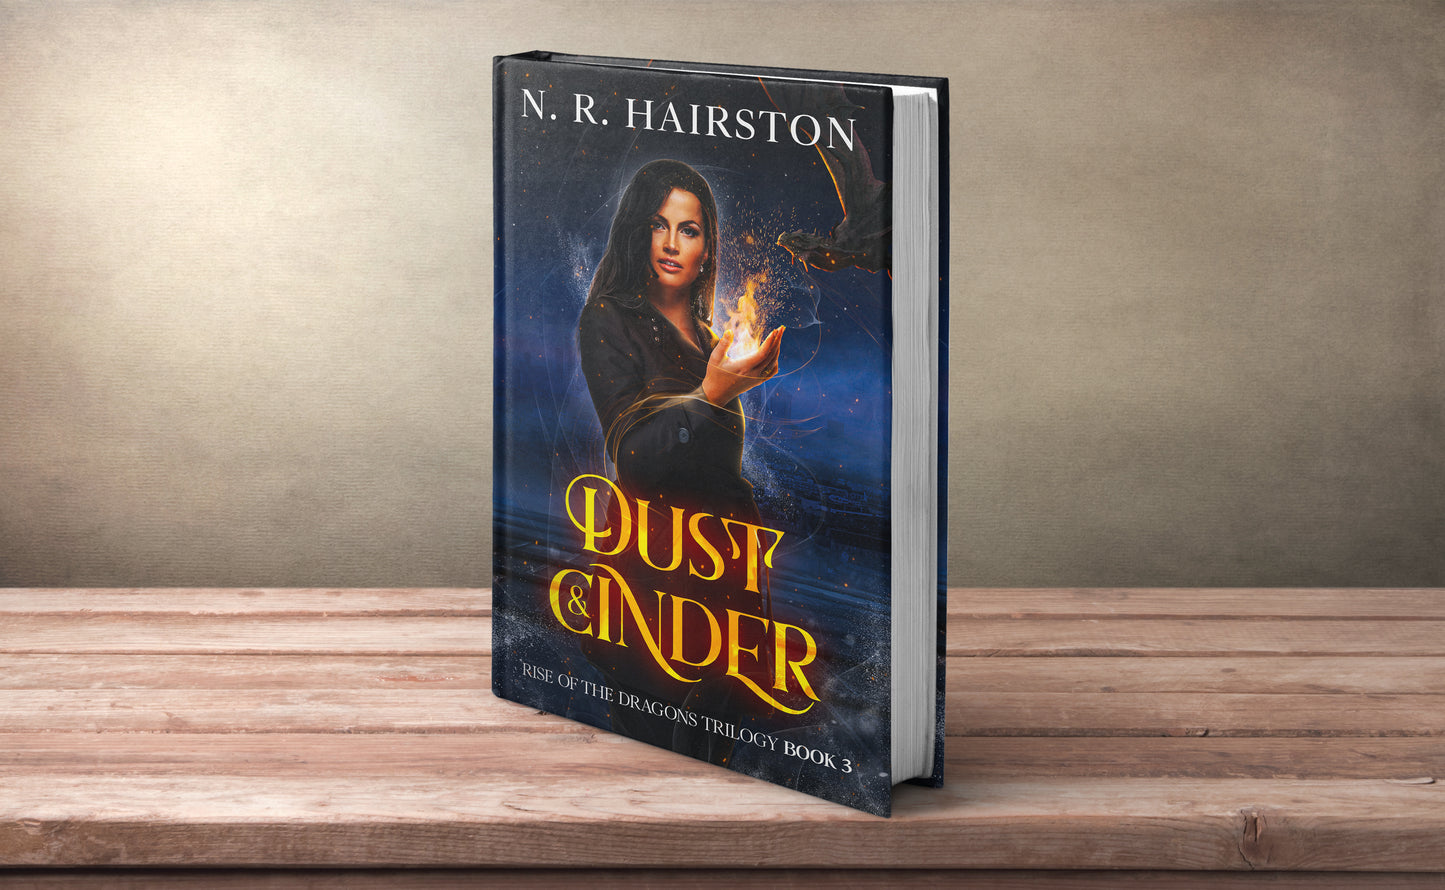 Dust and Cinder (Rise of the Dragons Trilogy Book 3) Paperback Signed Copy